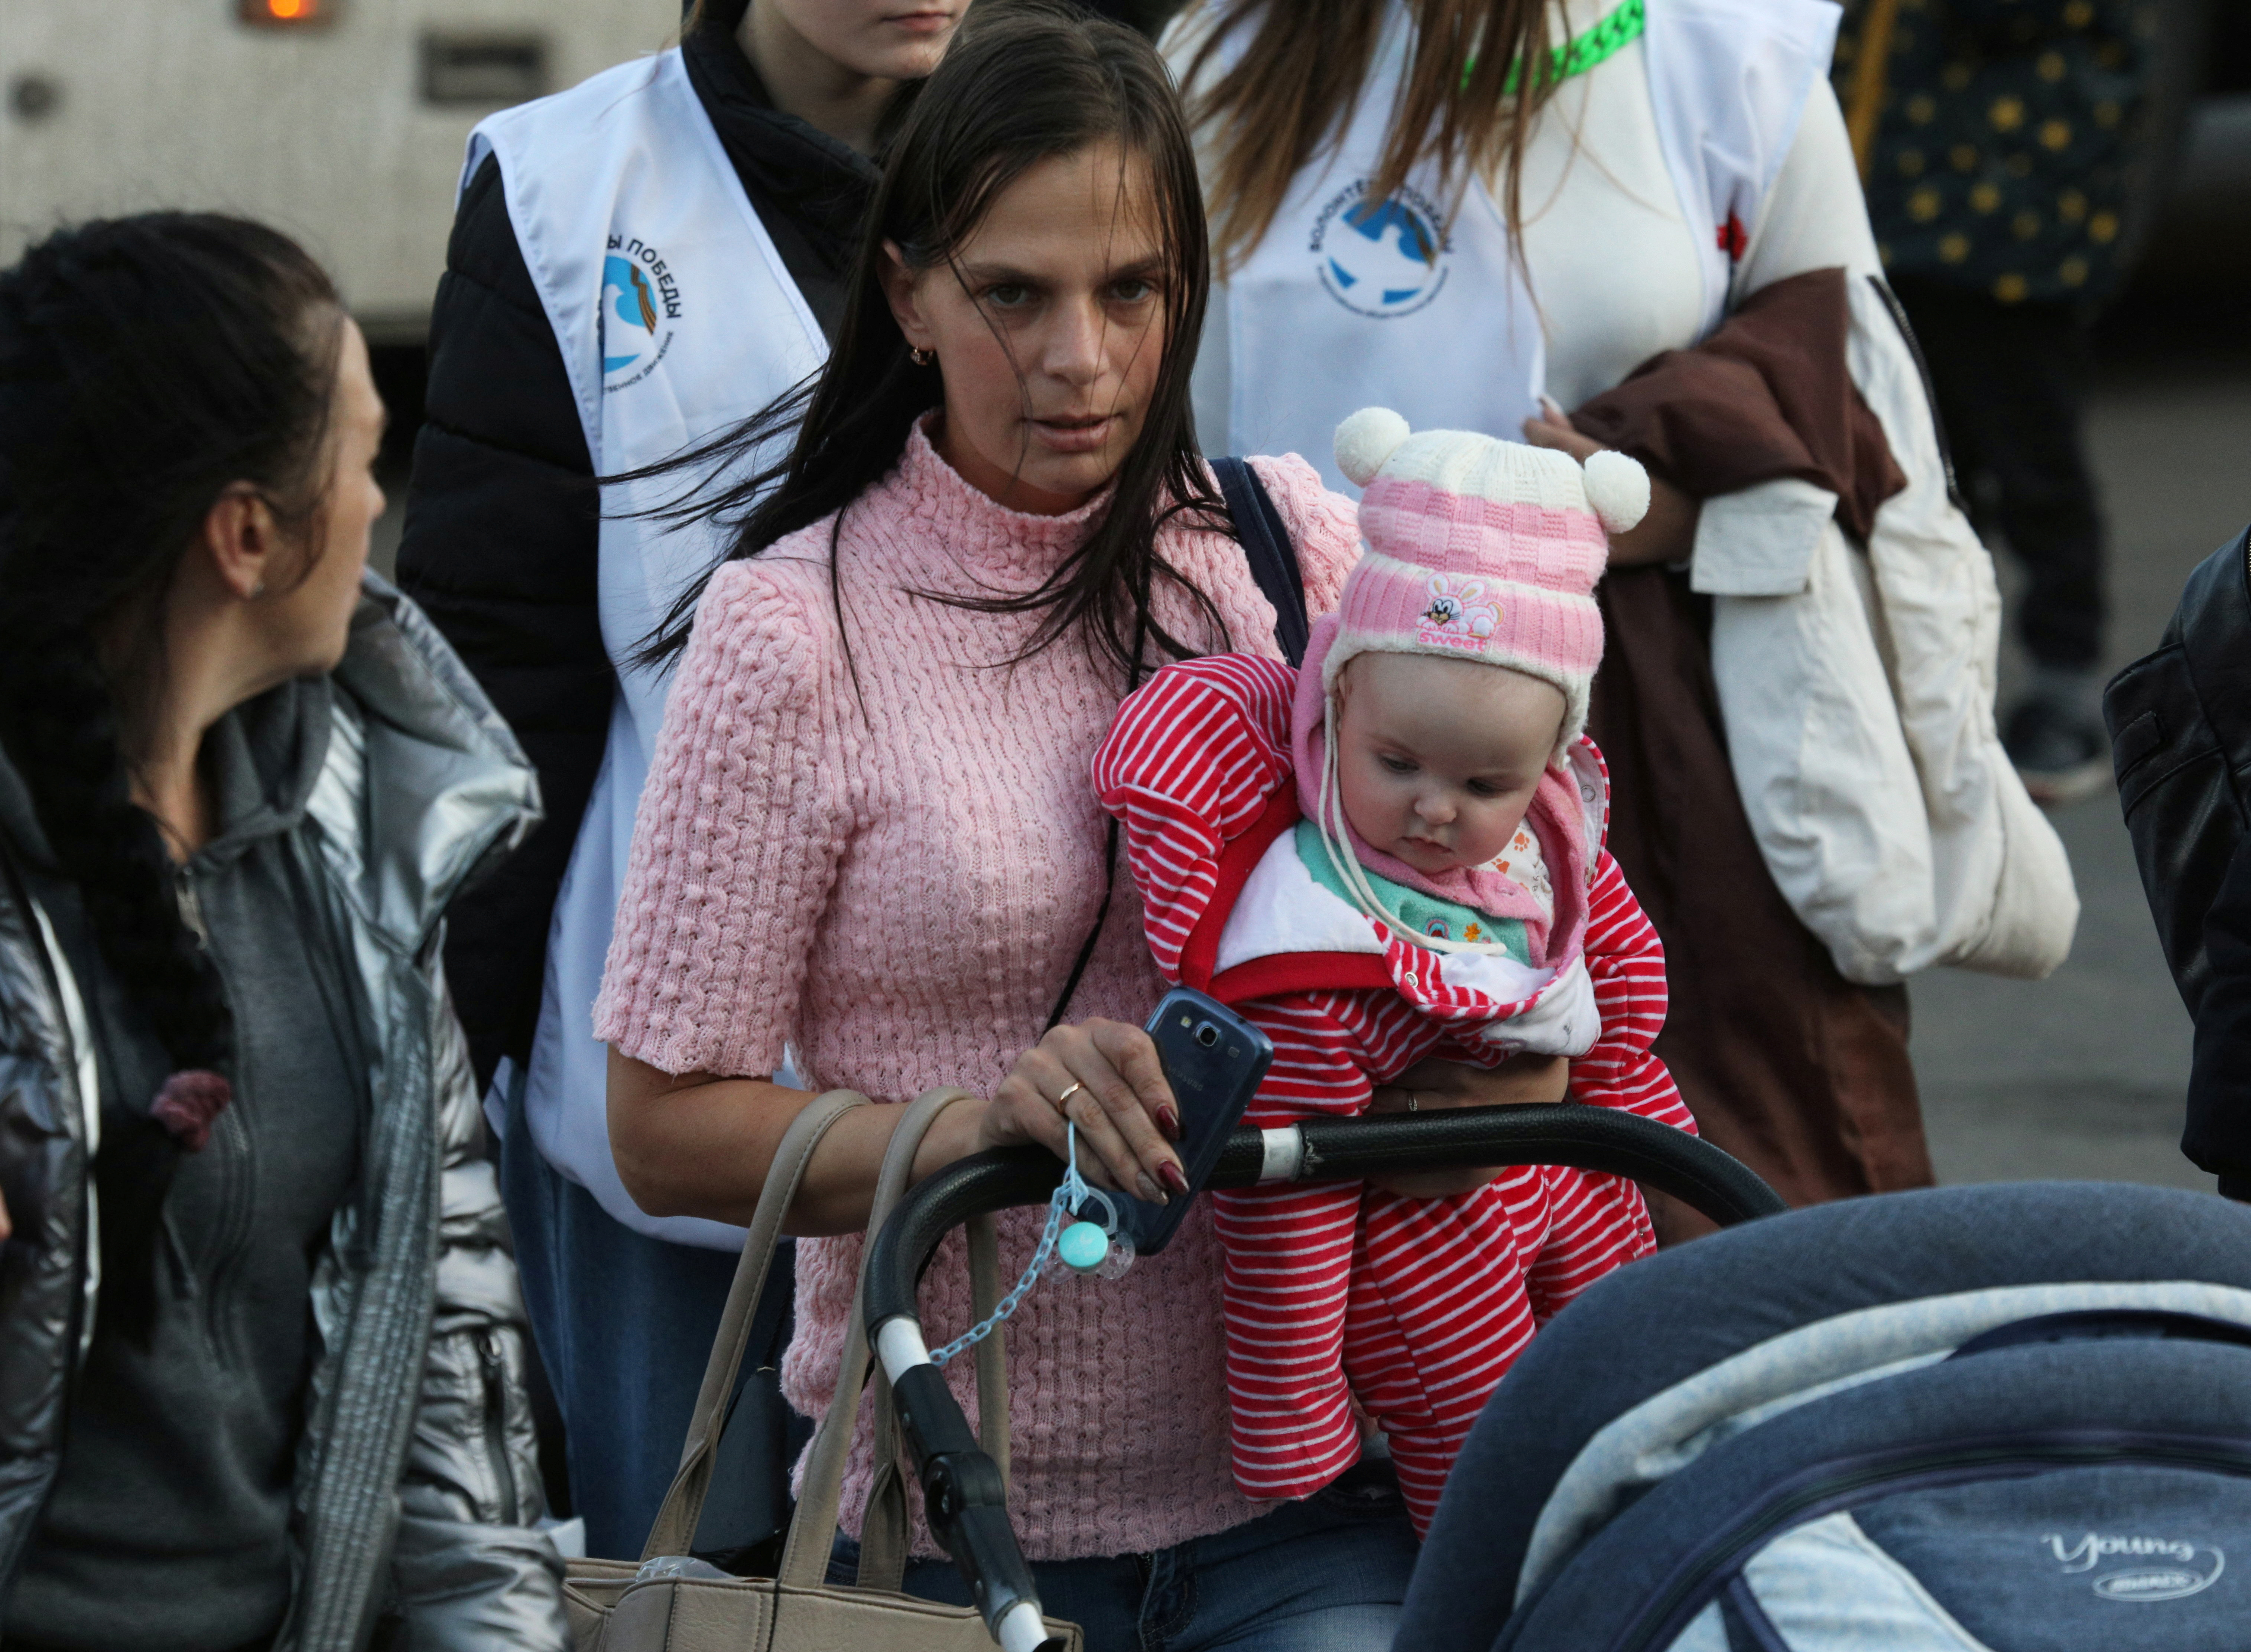 Evacuated citizens from the Russian-controlled Kherson region of Ukraine arrive at a local train station, a woman carries a baby, after Russian-appointed authorities extended an evacuation order to the area on the east bank of the Dnipro River in the Crimean town of Zhankoy.  November 2, 2022. REUTERS/Alexey Pavlishak